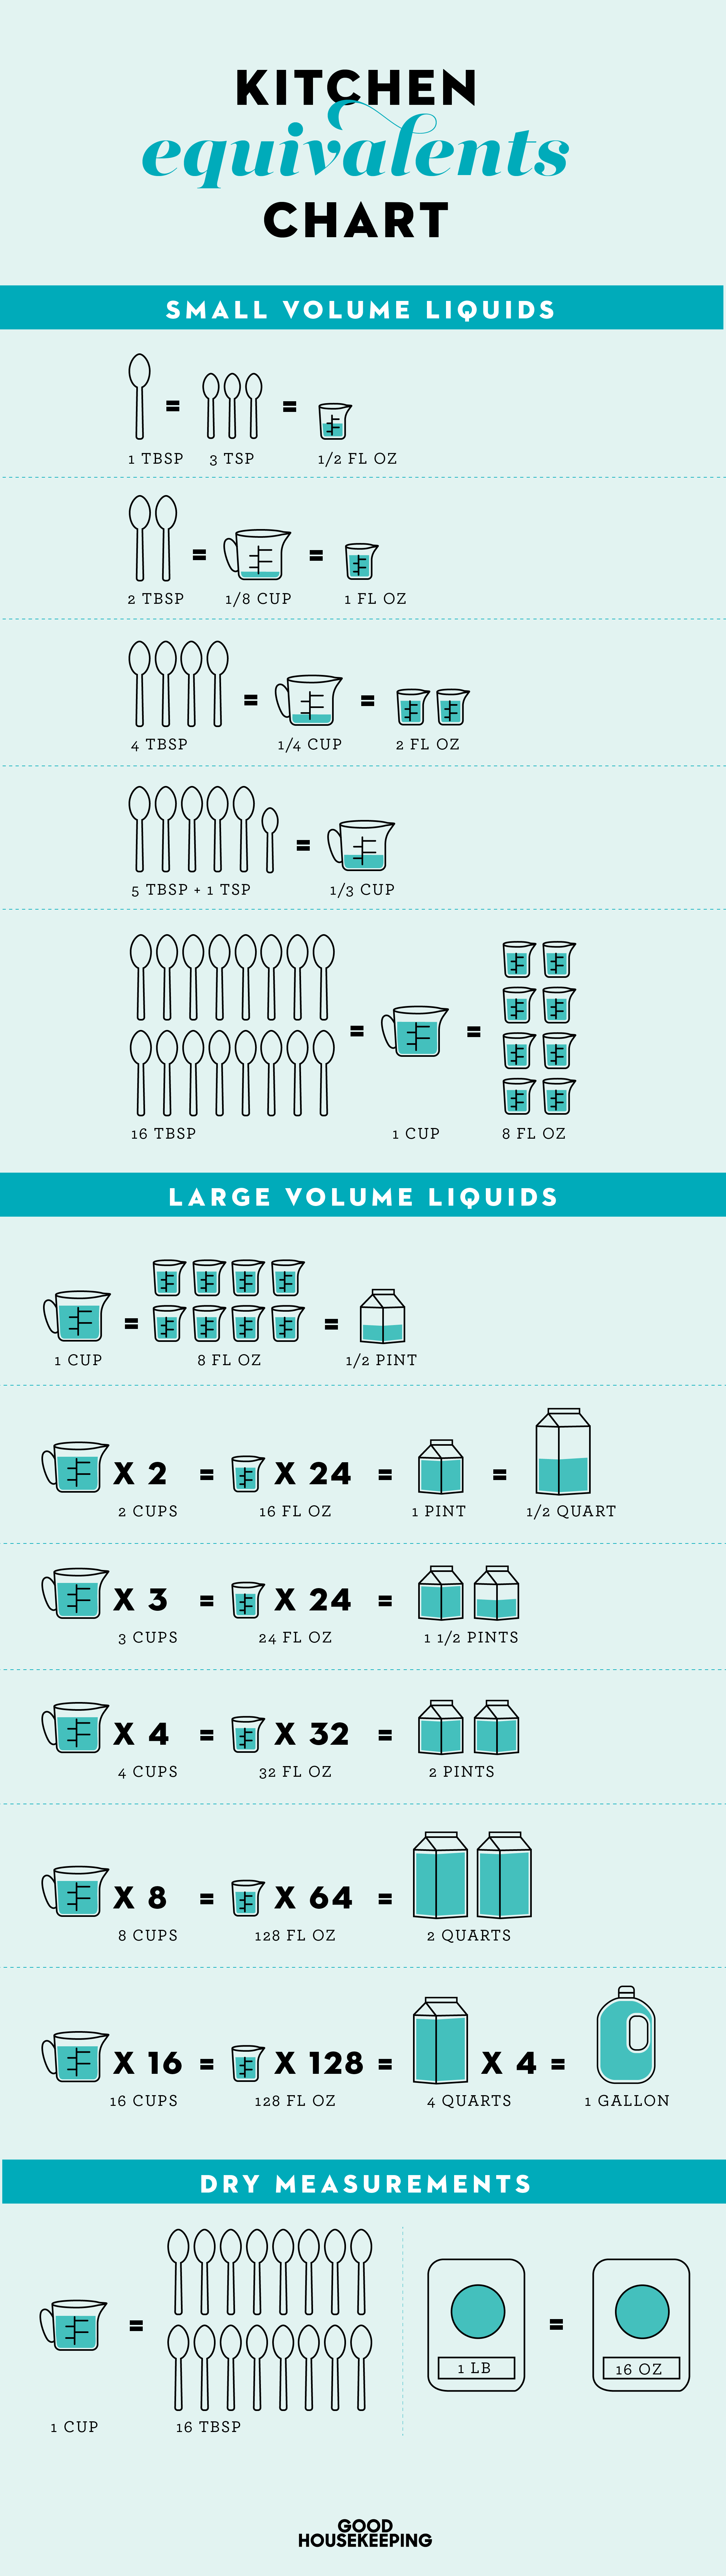 What is the quantity of 1/2 cups required to make 1 cup? - Poe